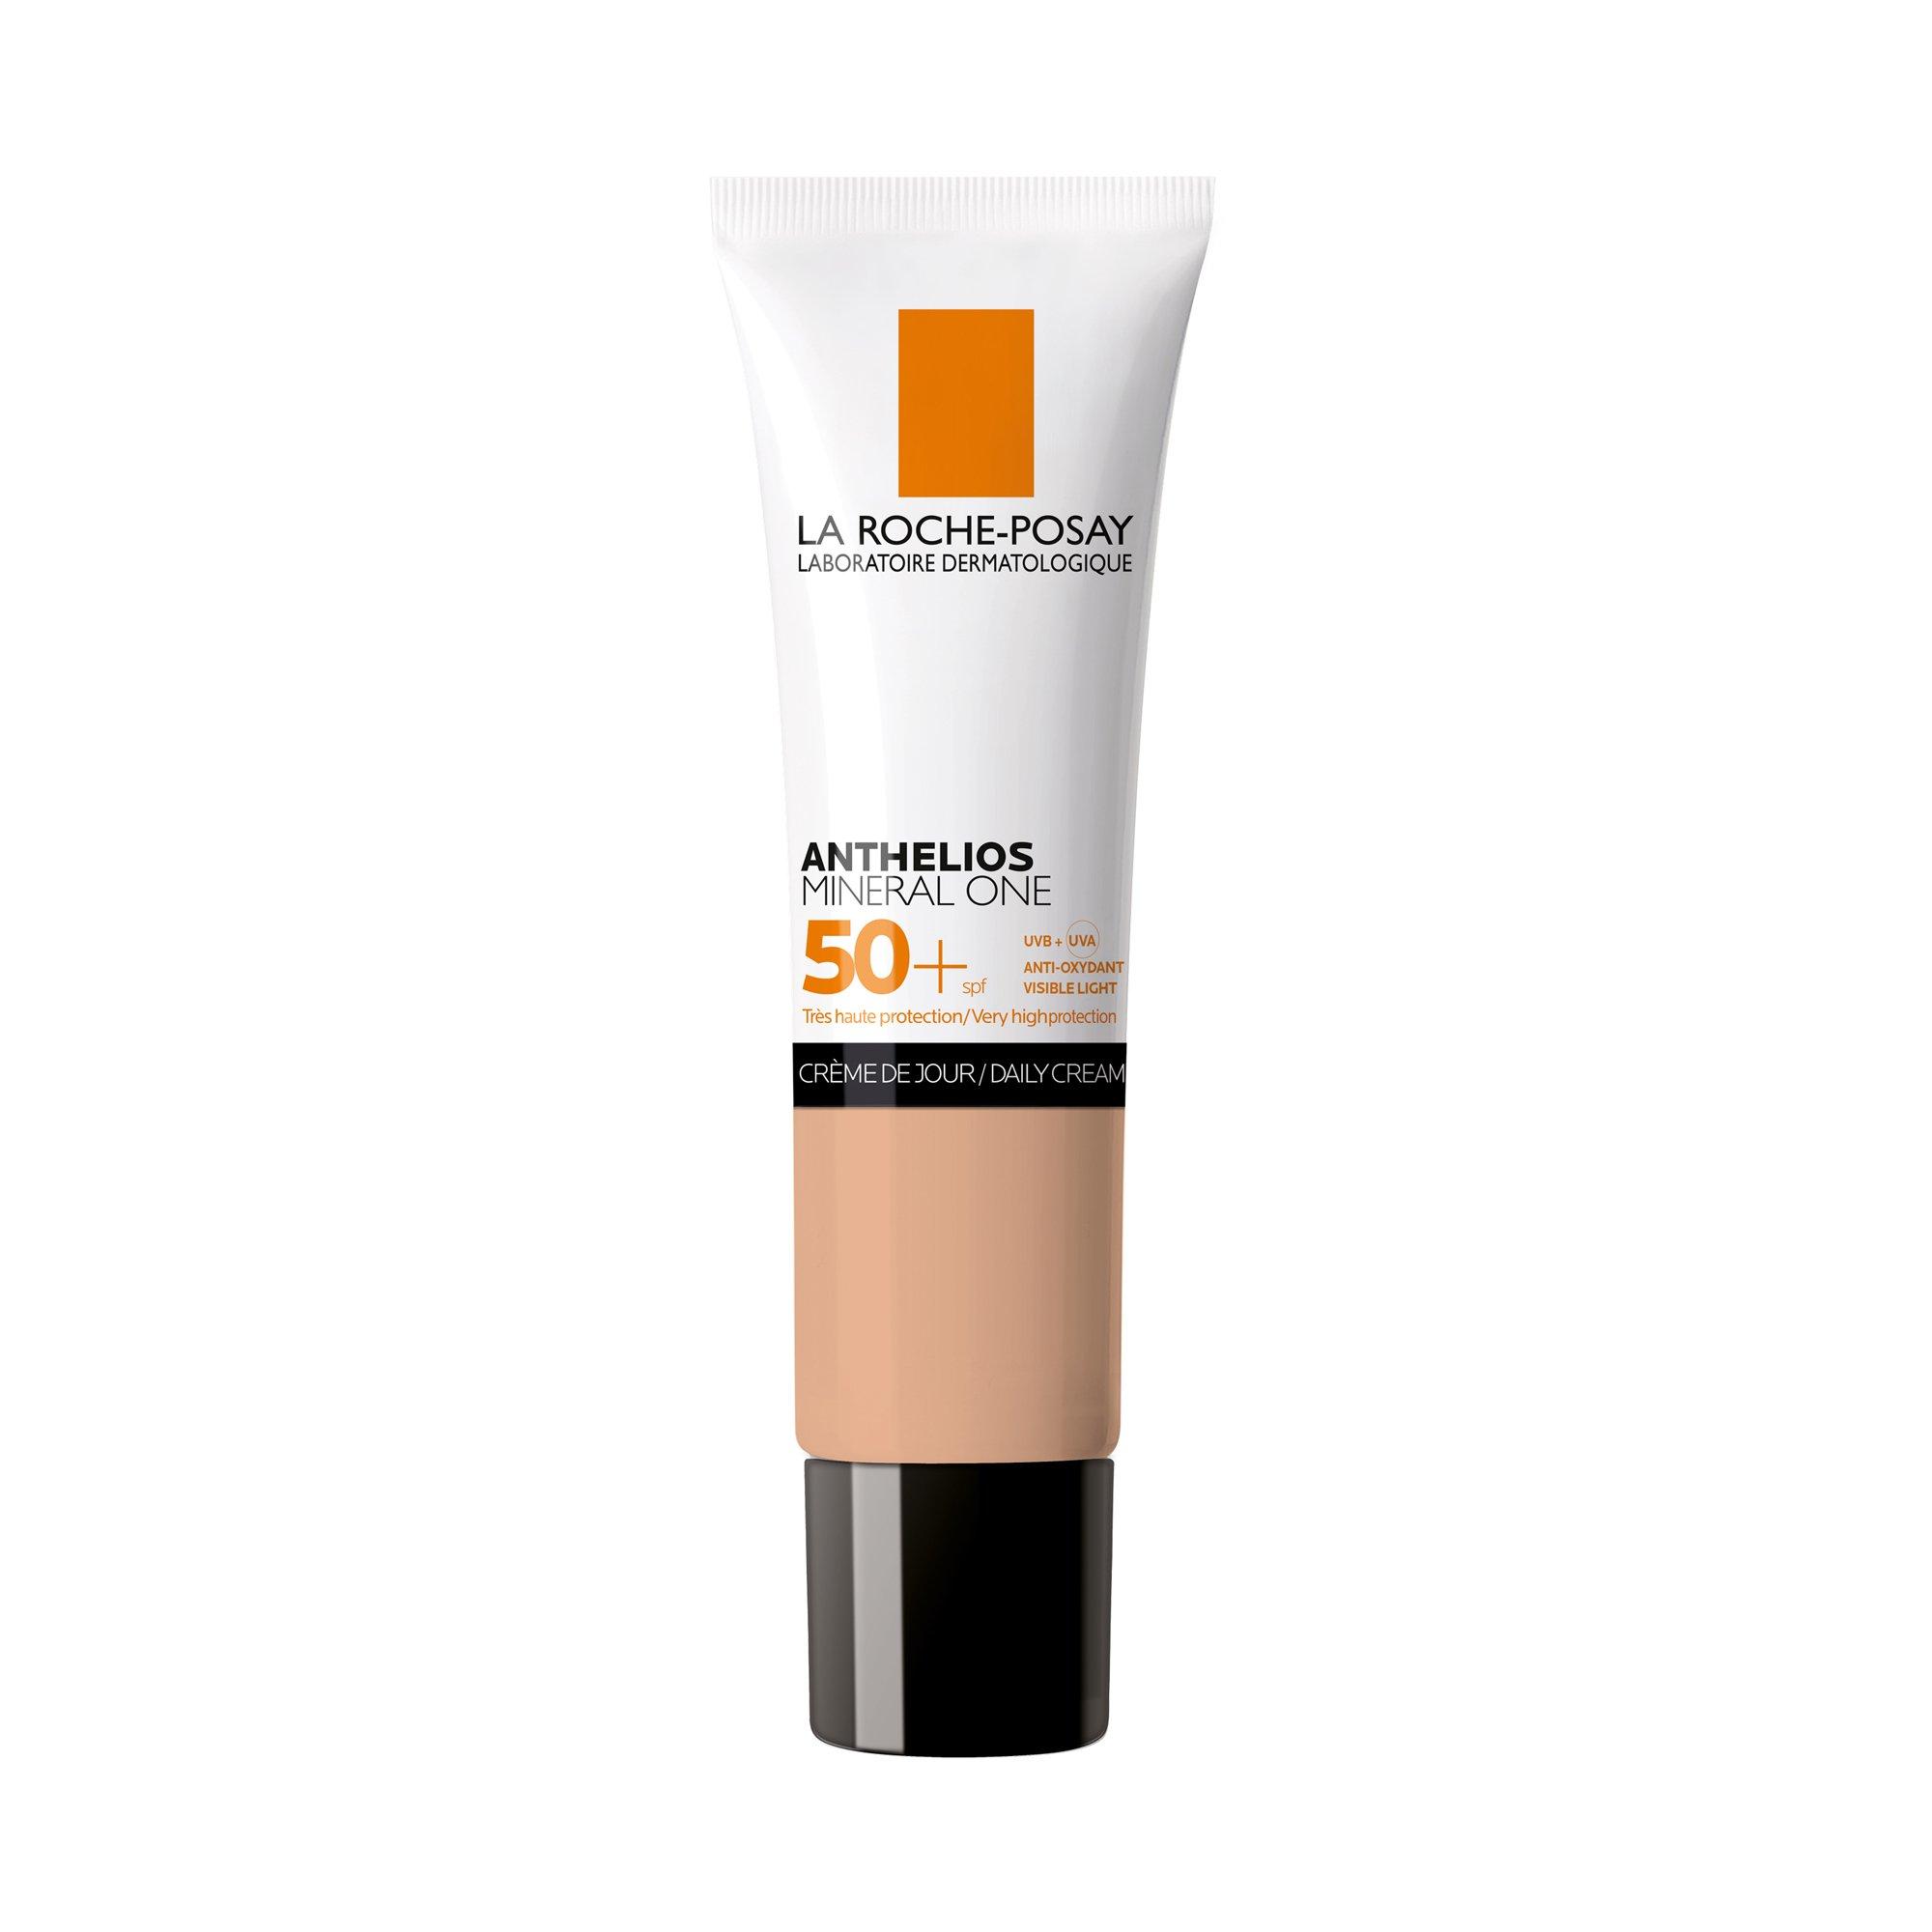 Image of LA ROCHE POSAY Anth. Mineral One SPF50+ T03 ANTHELIOS Minéral One LSF50+ - 30ml